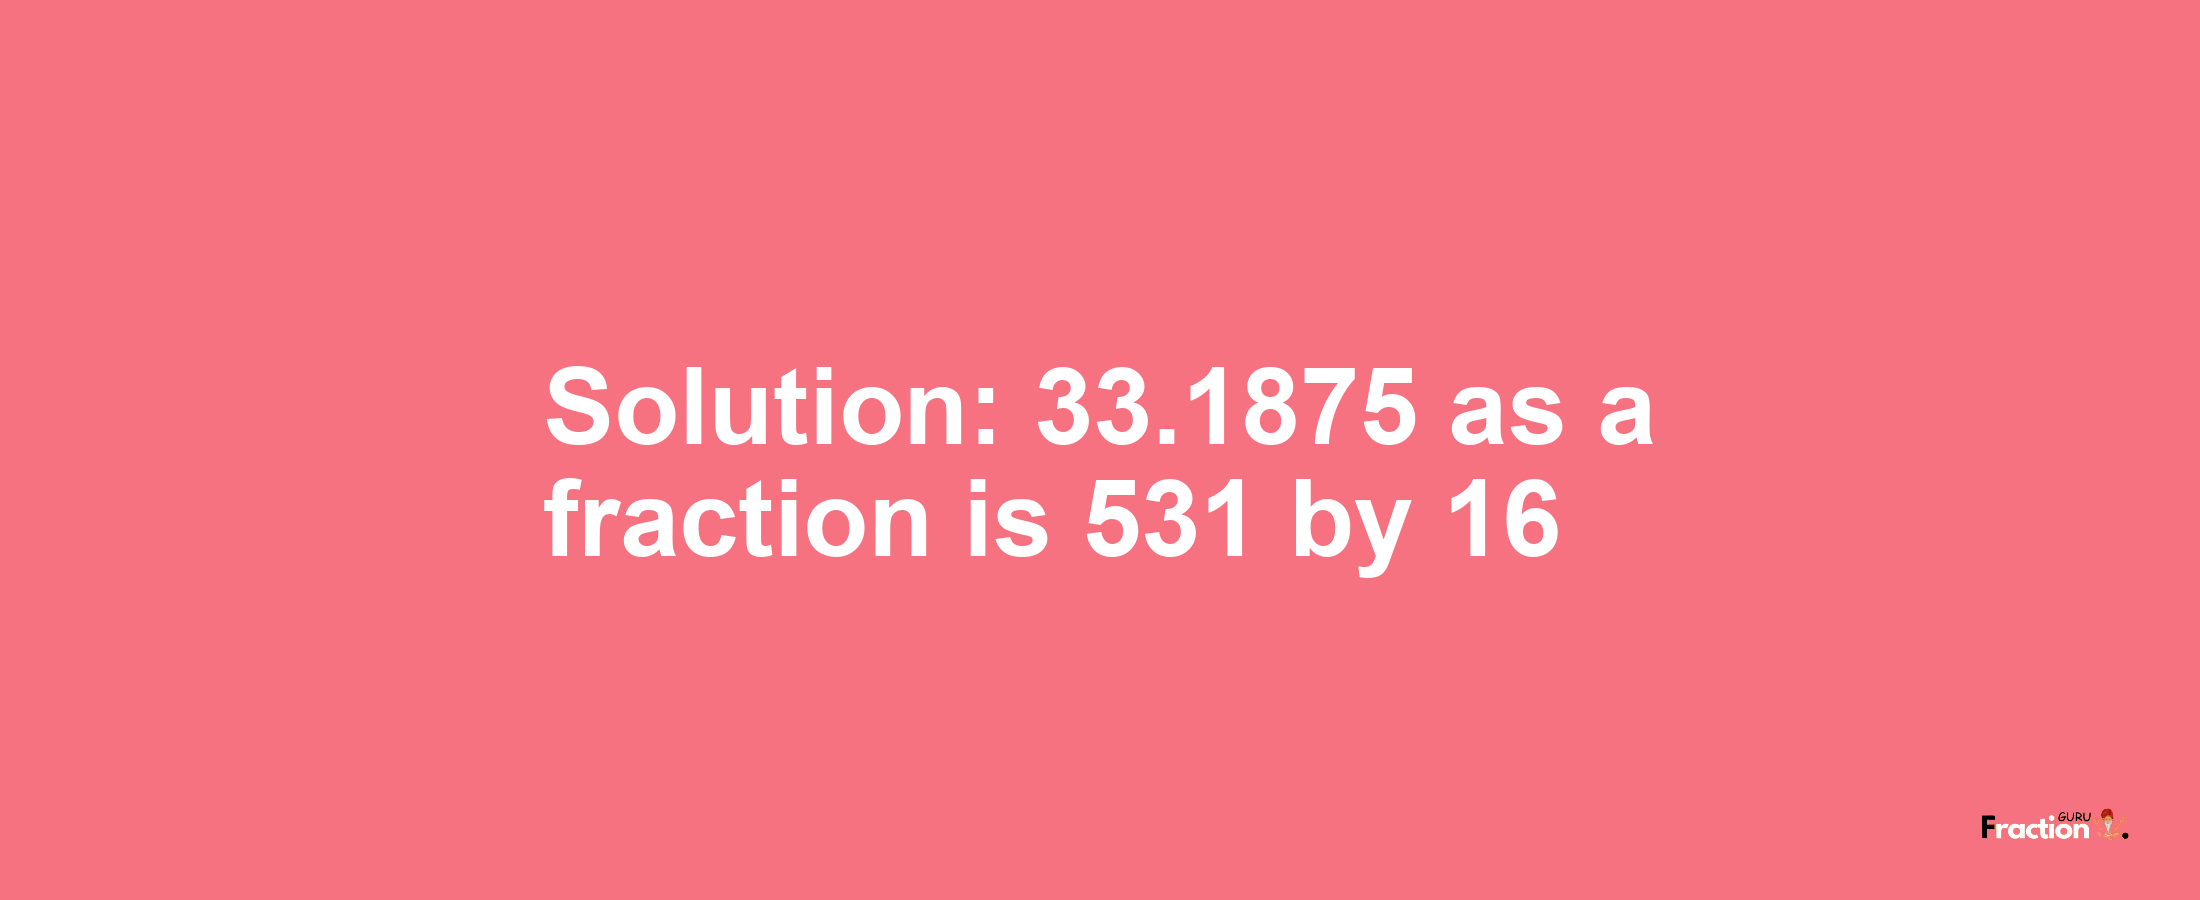 Solution:33.1875 as a fraction is 531/16